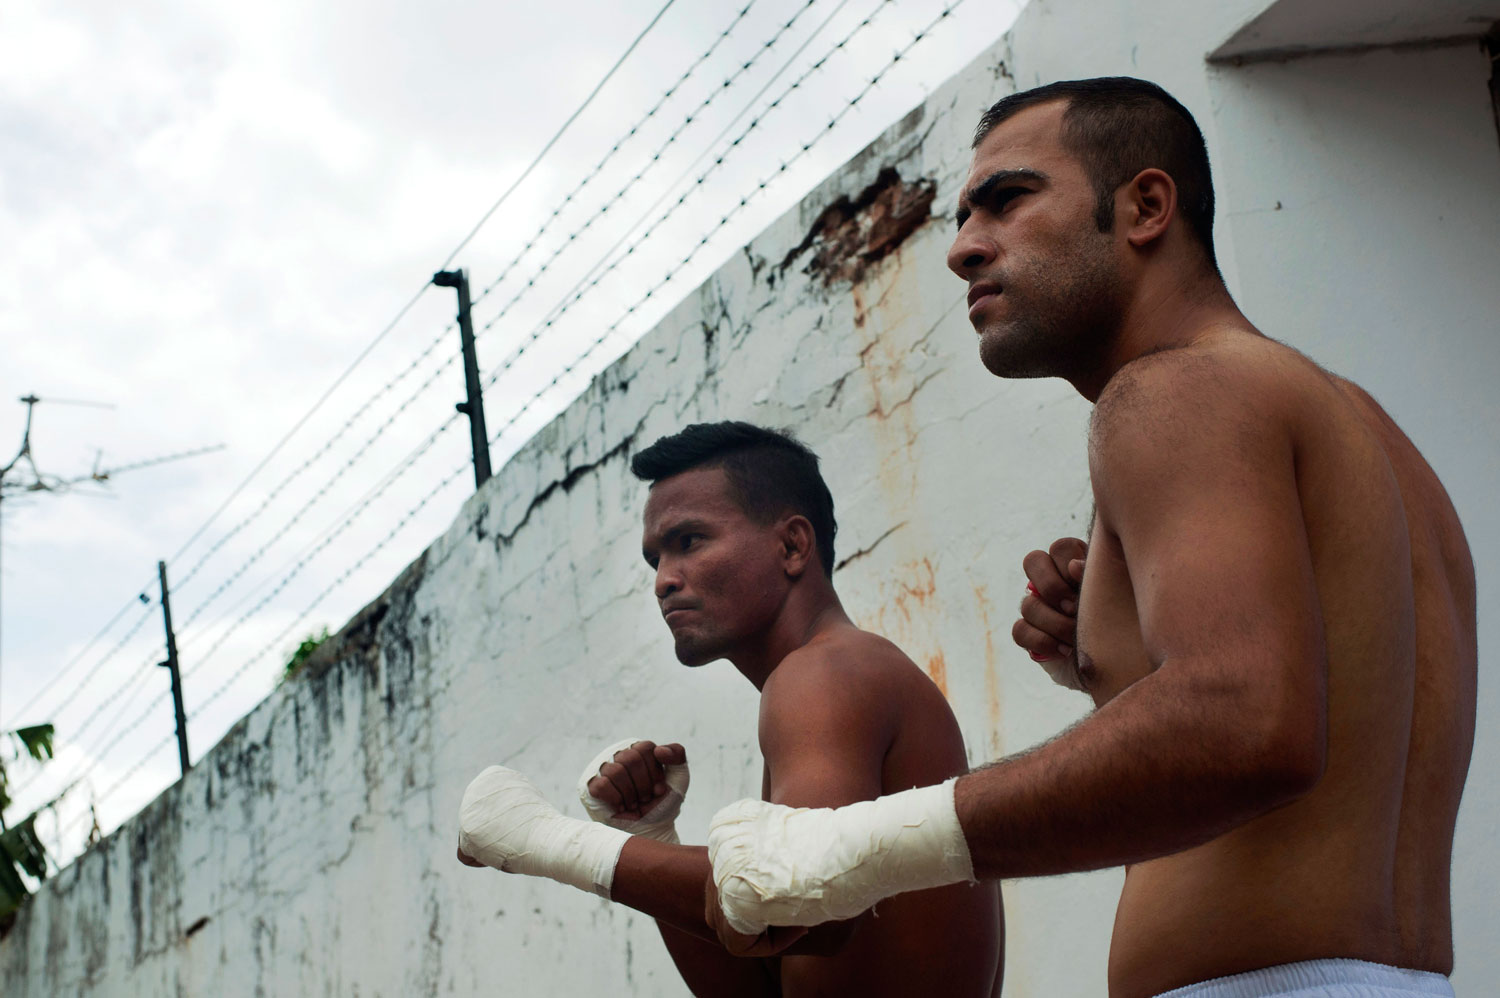 Inmates And Foreigners Compete In Thailand's Prison Fight